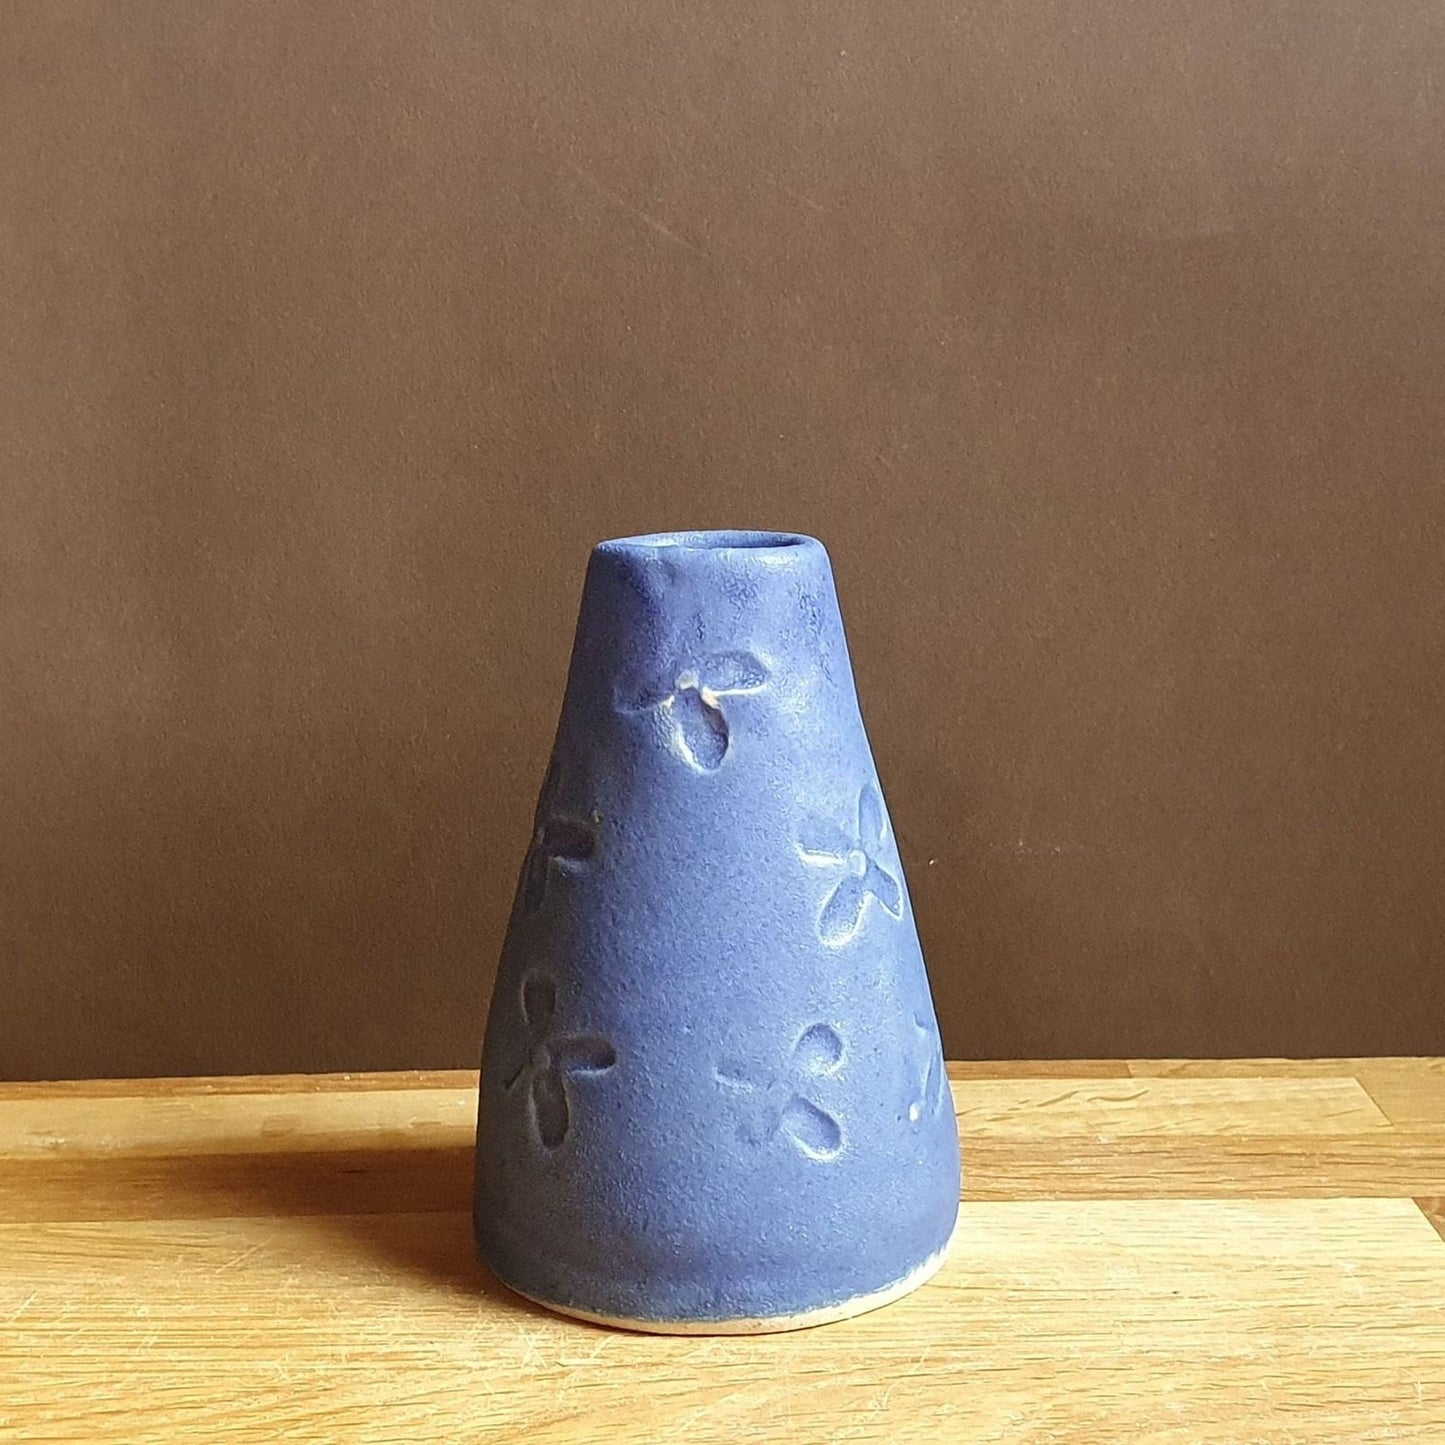 Reed diffuser or small flower vase handmade stoneware